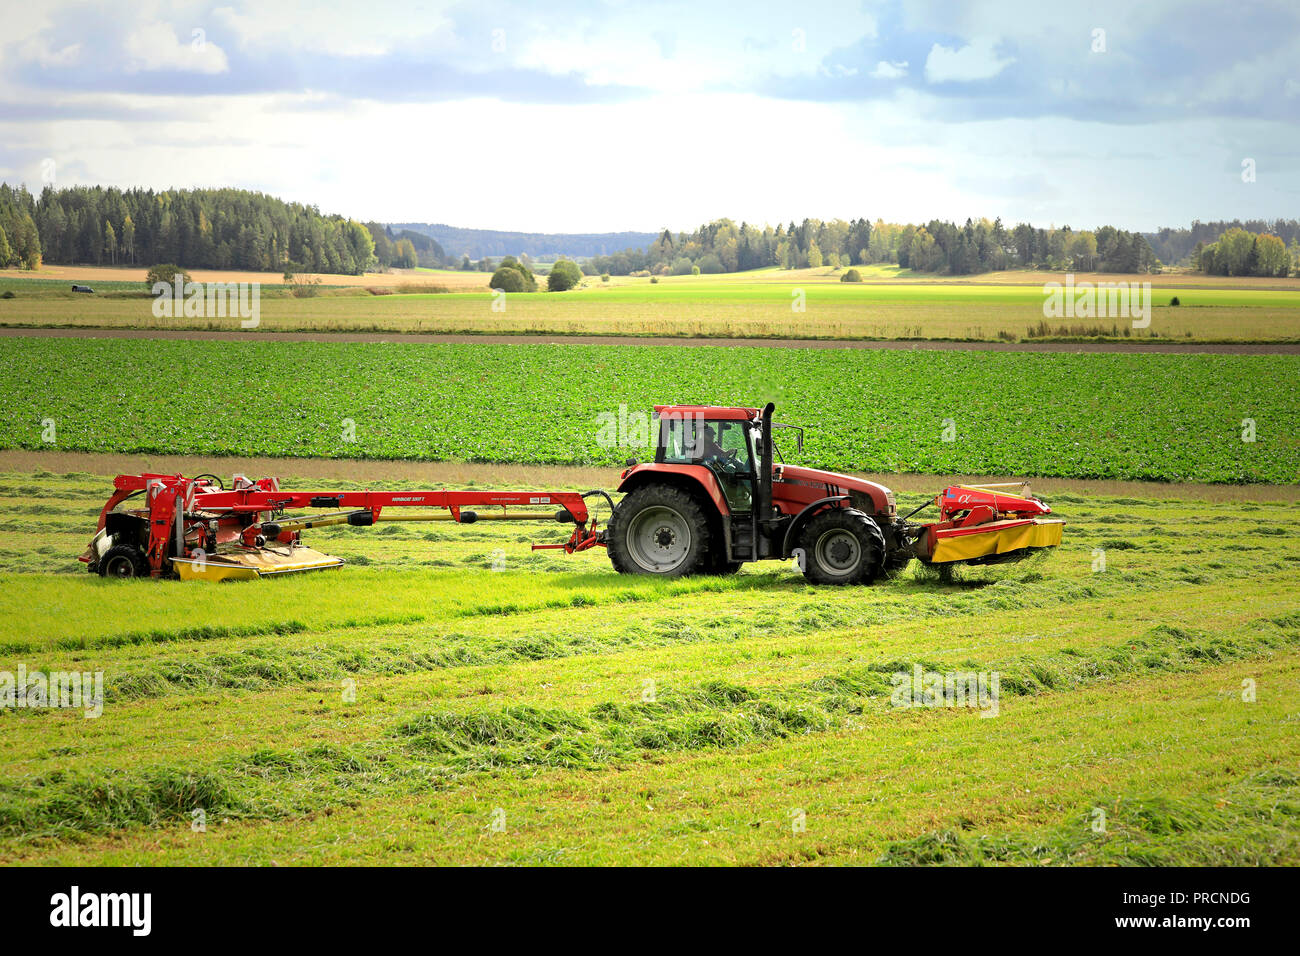 Salo, Finland - September 23, 2018: Farmer cuts hay on farmland with NOVACAT T trailed disc mower pulled by Case IH CS120 tractor on a beautiful day. Stock Photo